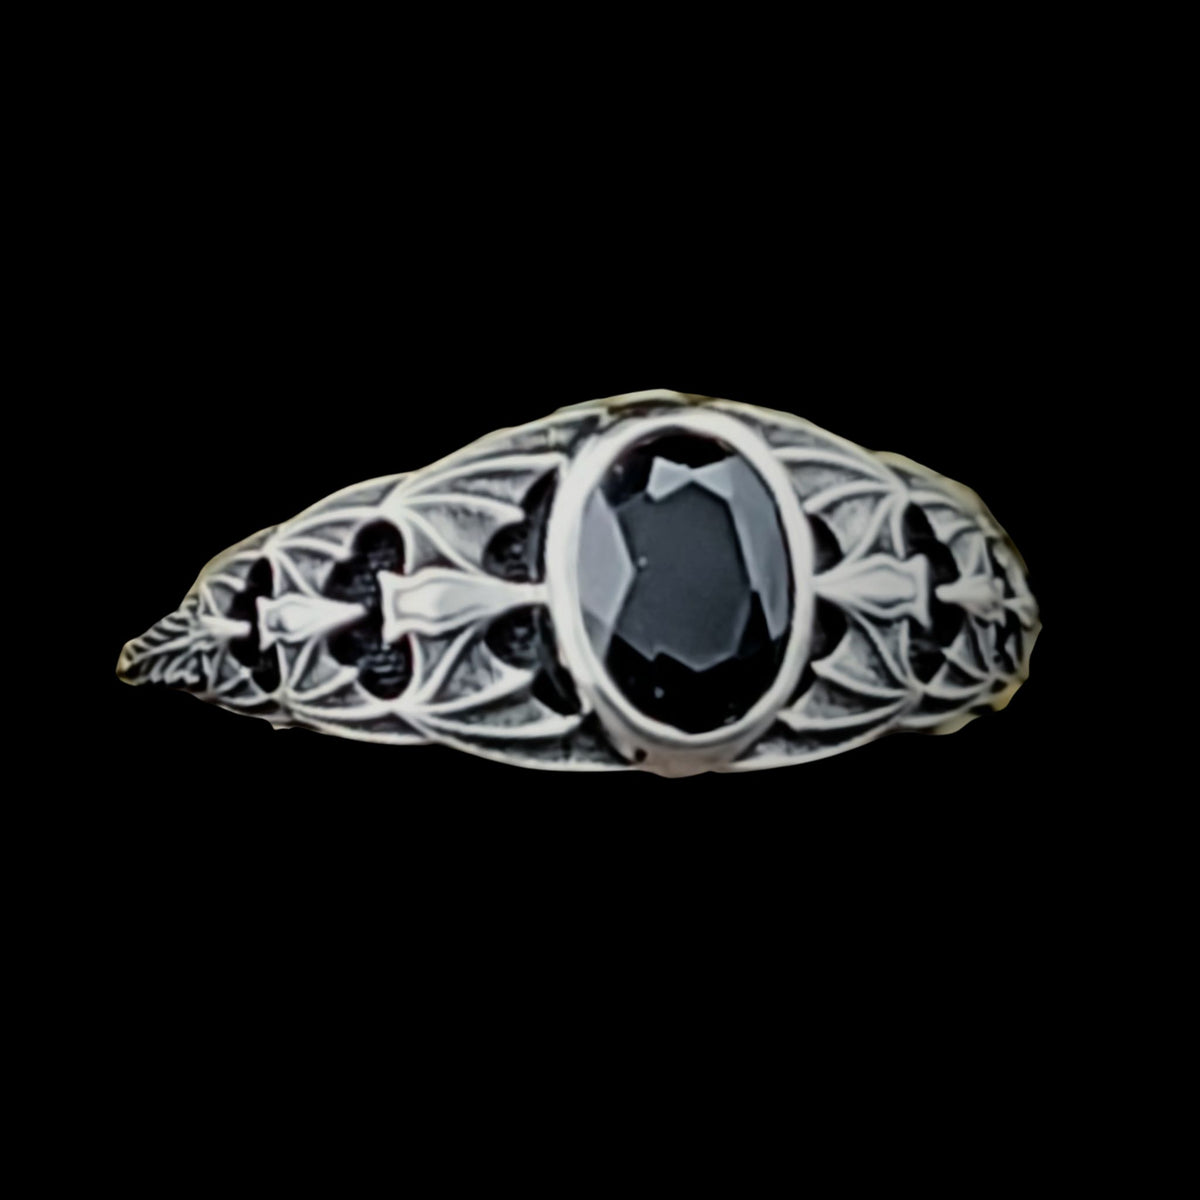 Gothic Nightfall Cascading Bat Solitaire Statement Ring with Black Spinel or Garnet